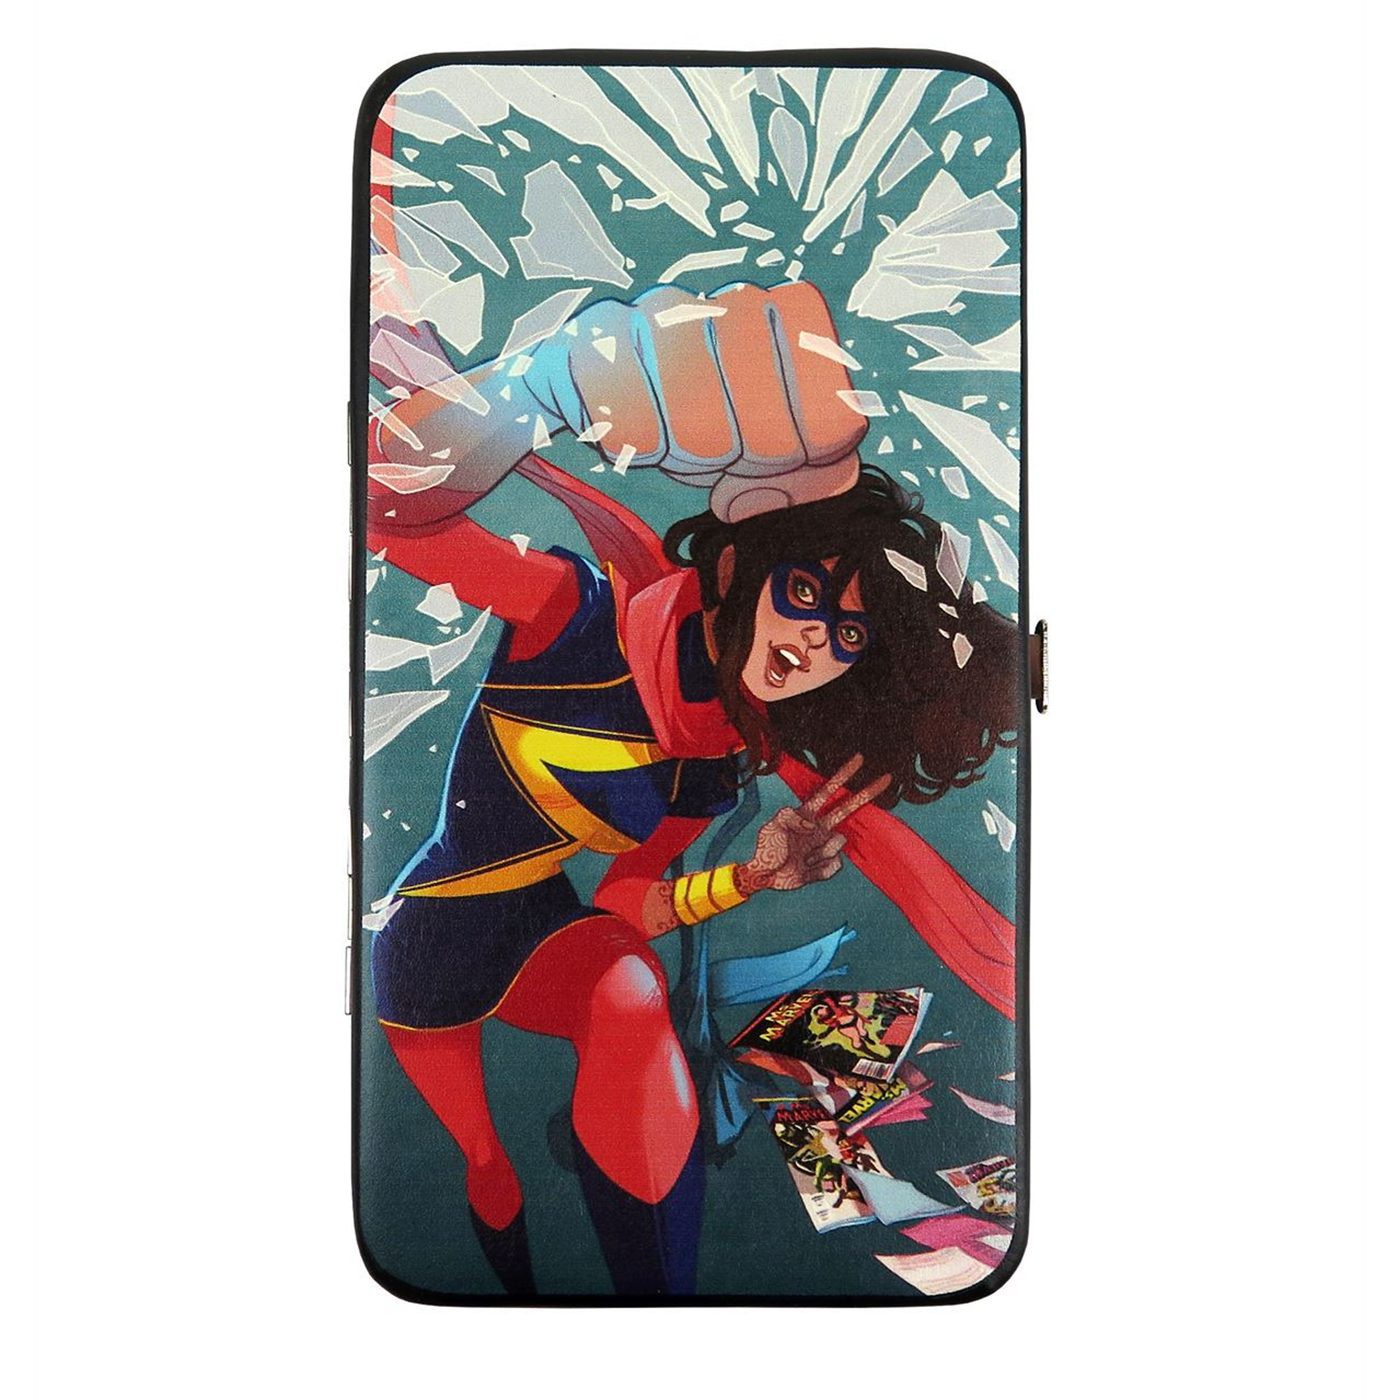 Ms. Marvel Action Punch Hinged Wallet